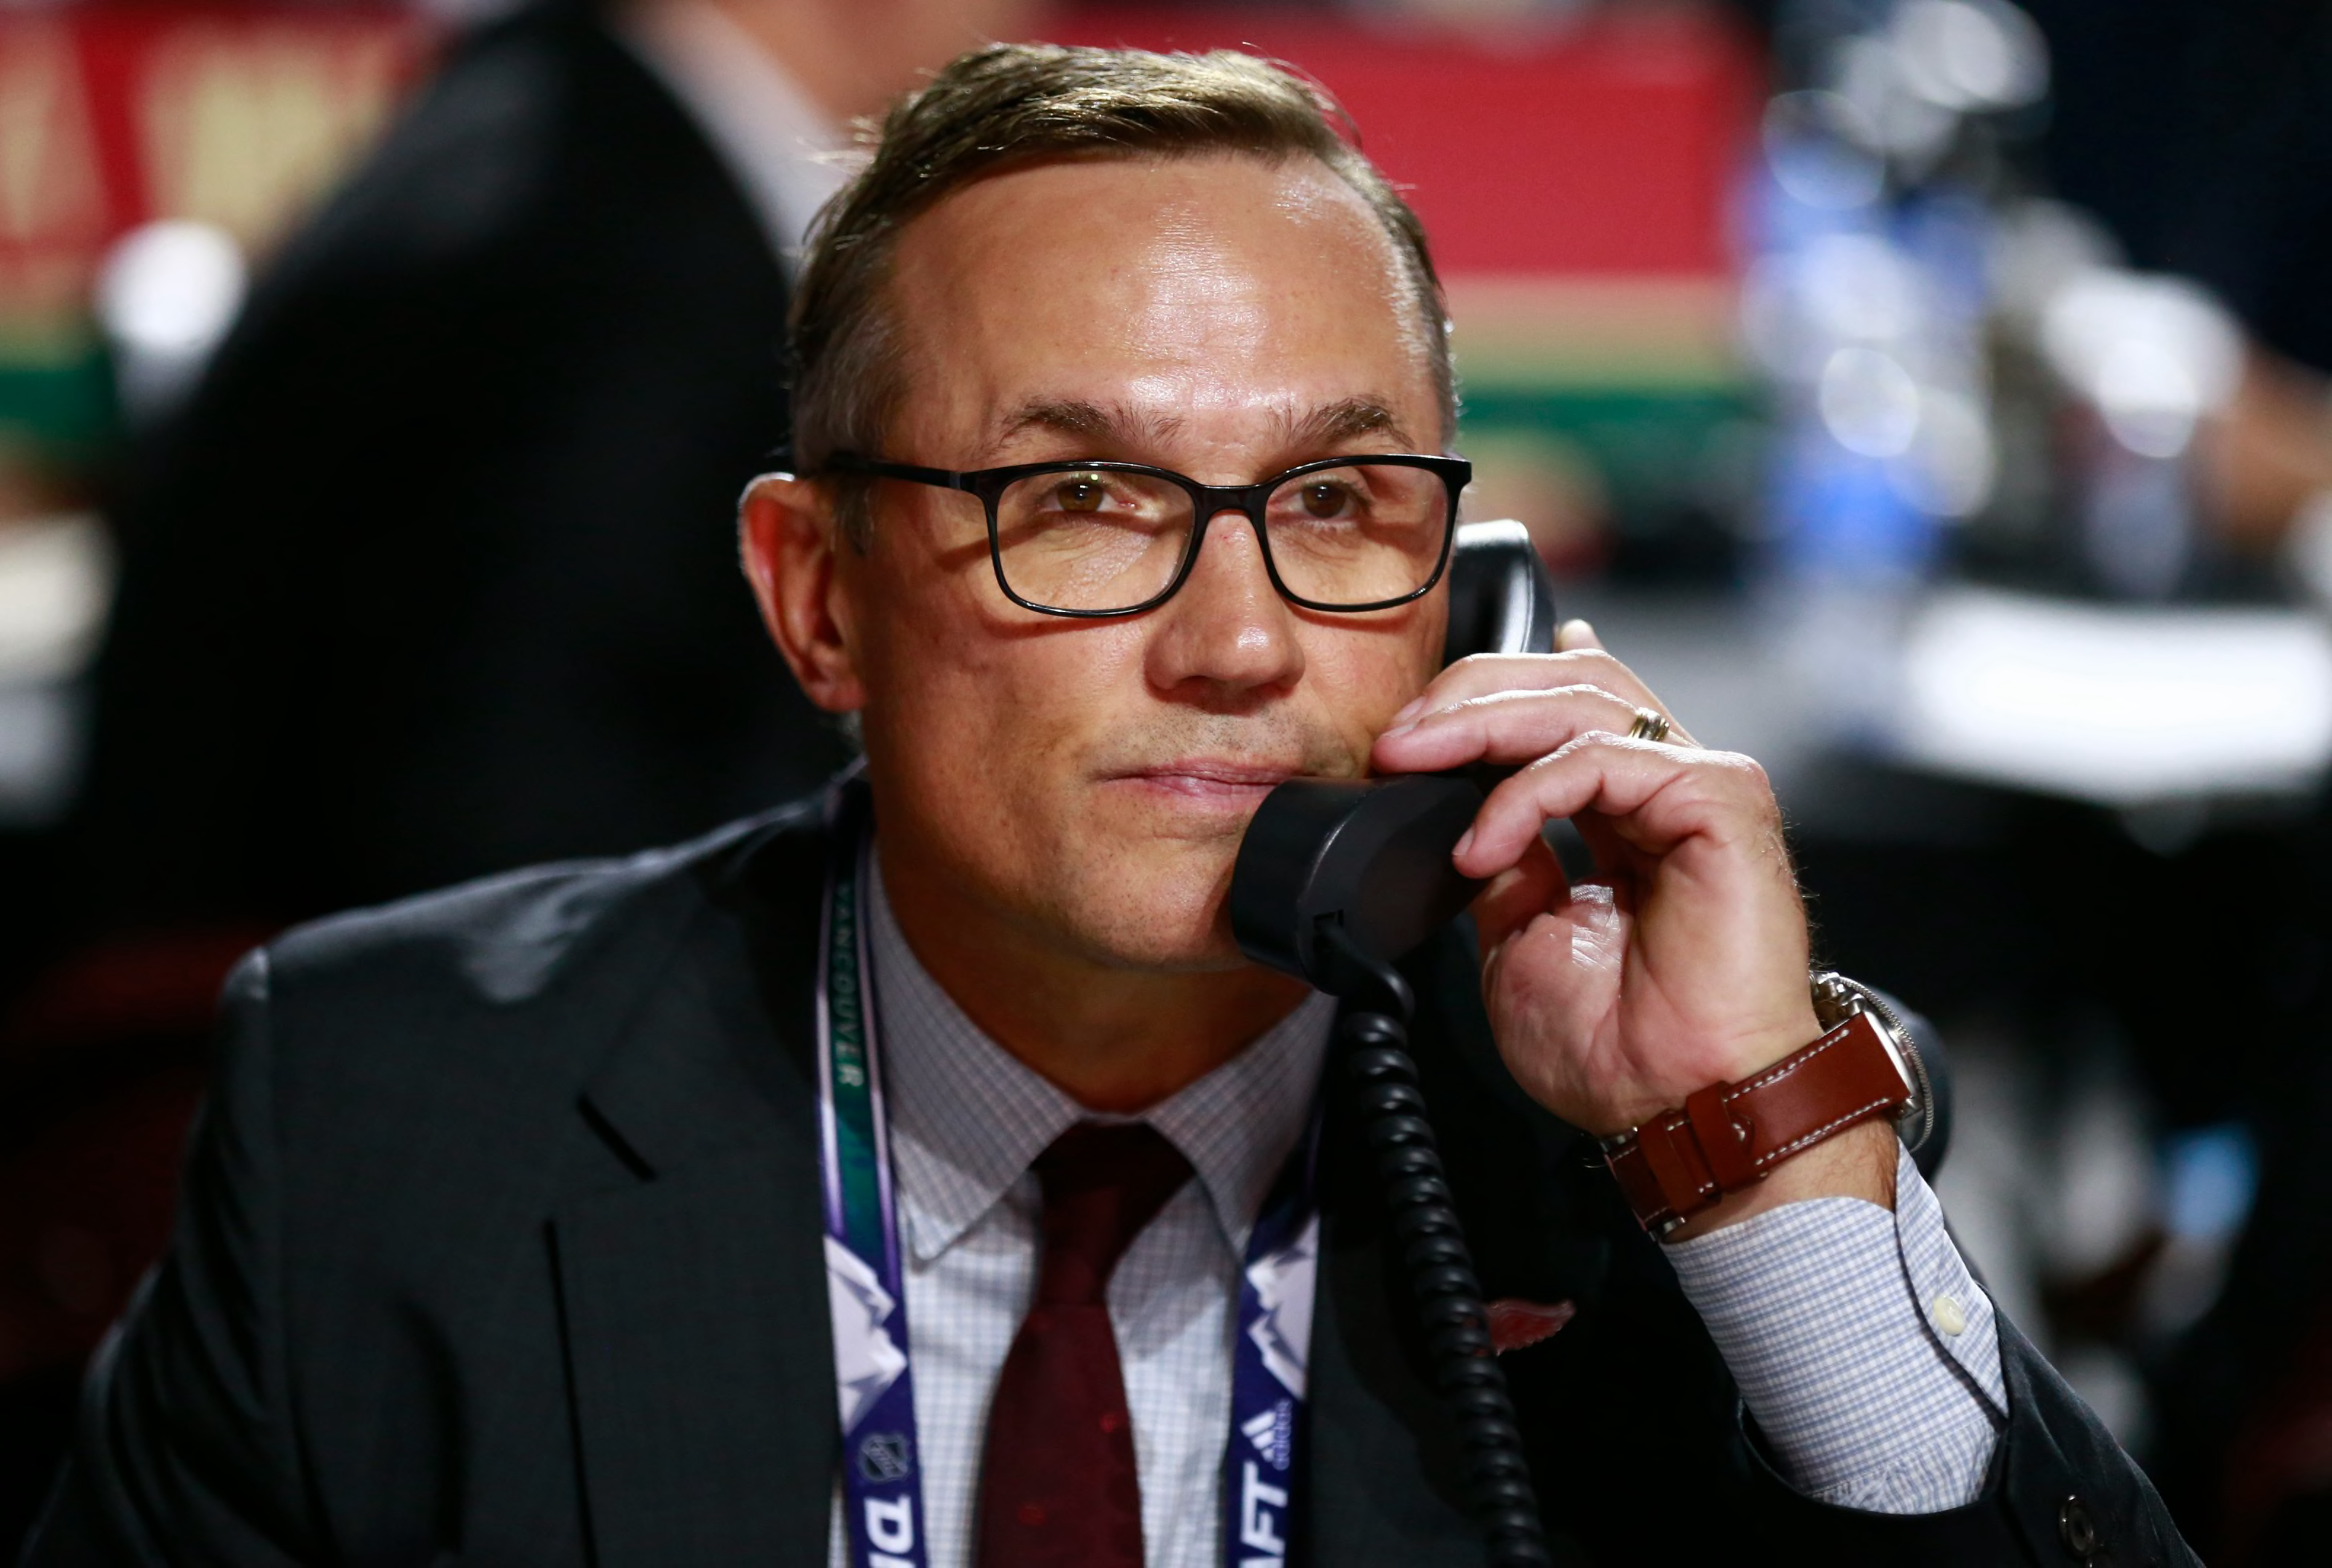 Steve Yzerman's rise up the GM ranks was decades in the making